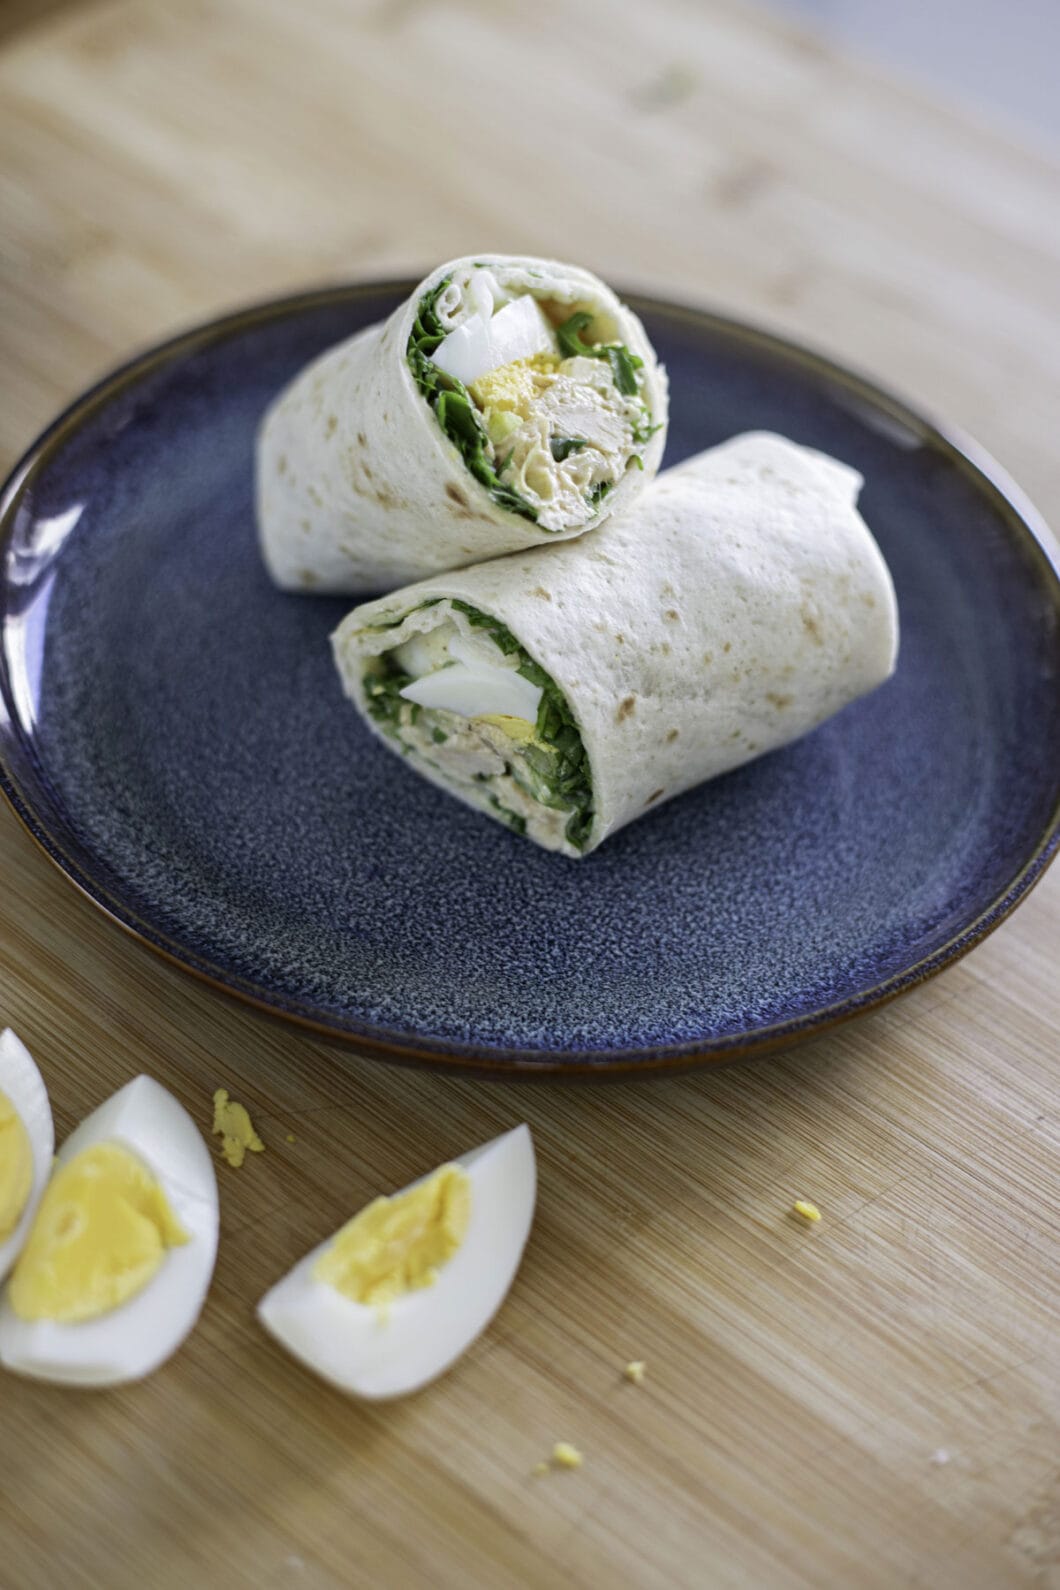 Wrap with arugula, eggs and shredded chicken in mayonnaise